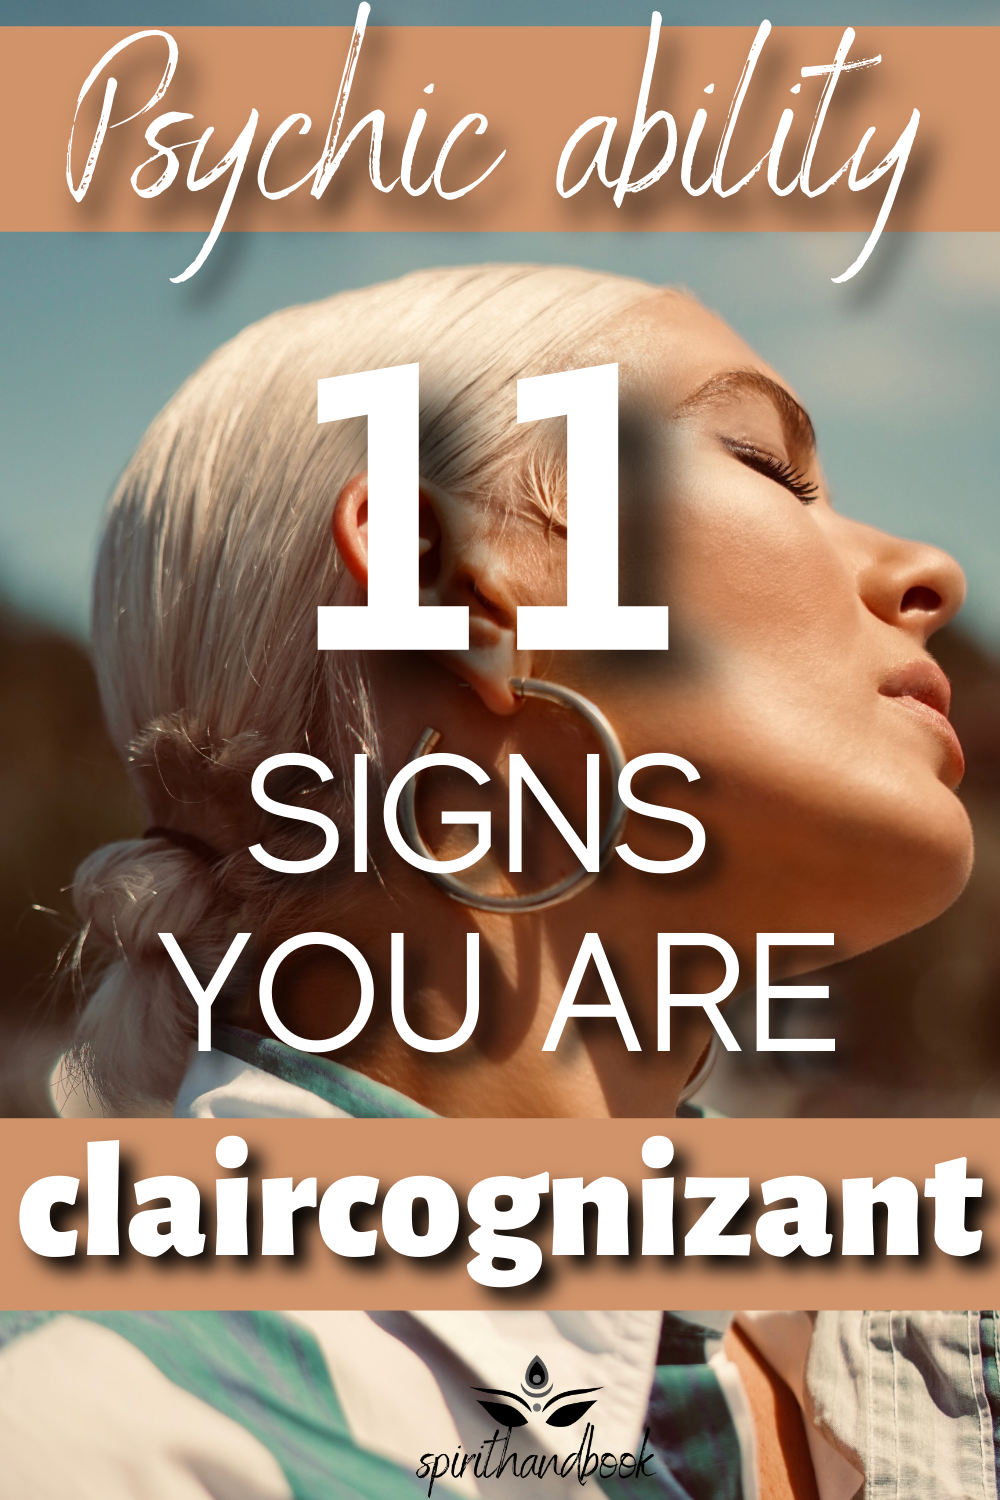 You are currently viewing Psychic Abilities: 11 Exciting Signs You Are Claircognizant